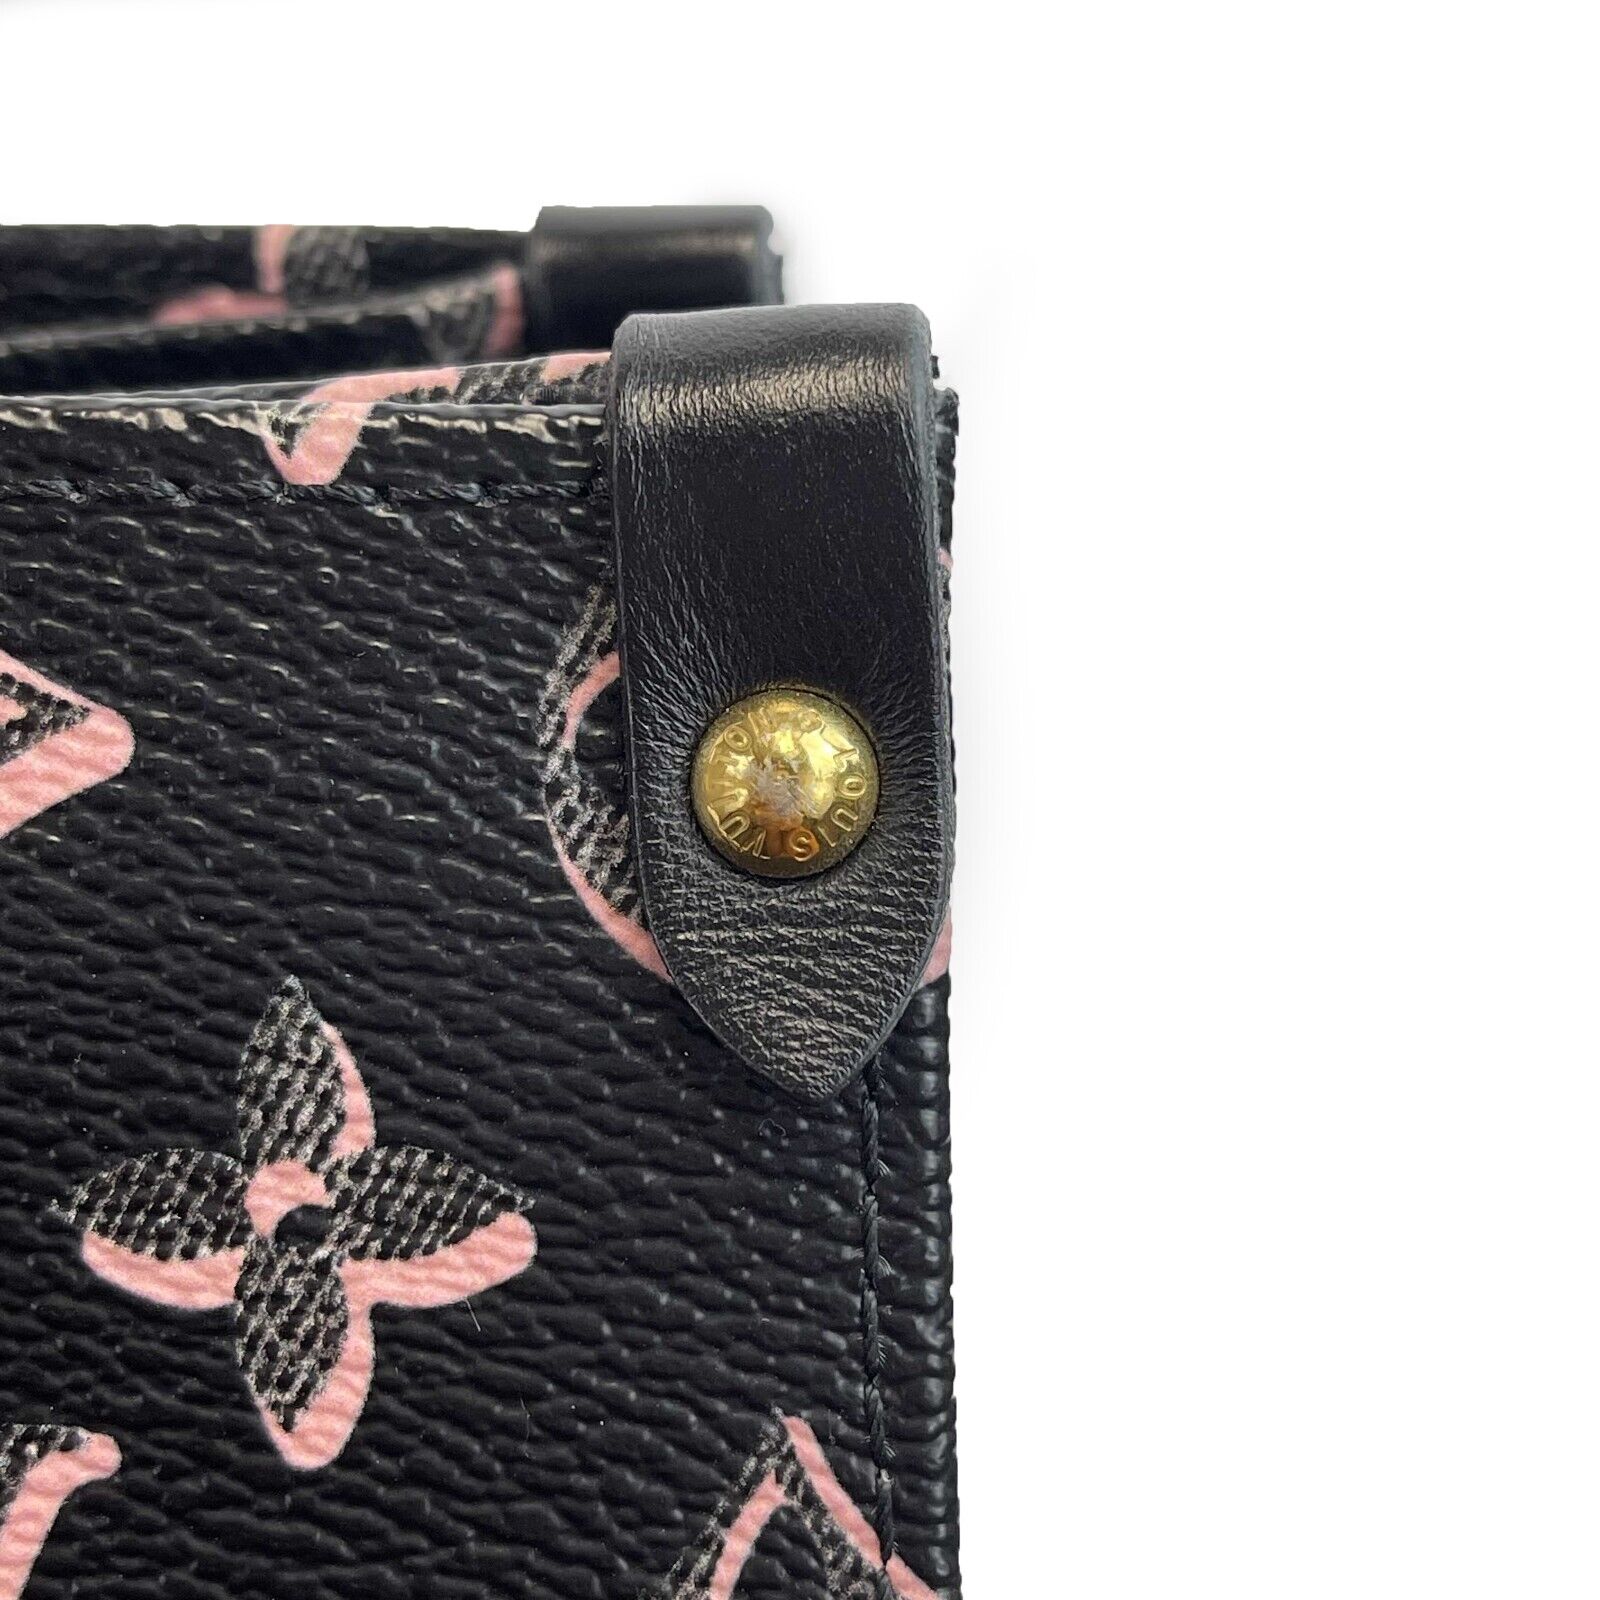 Louis Vuitton Fall For You Black Monogram OnTheGo MM